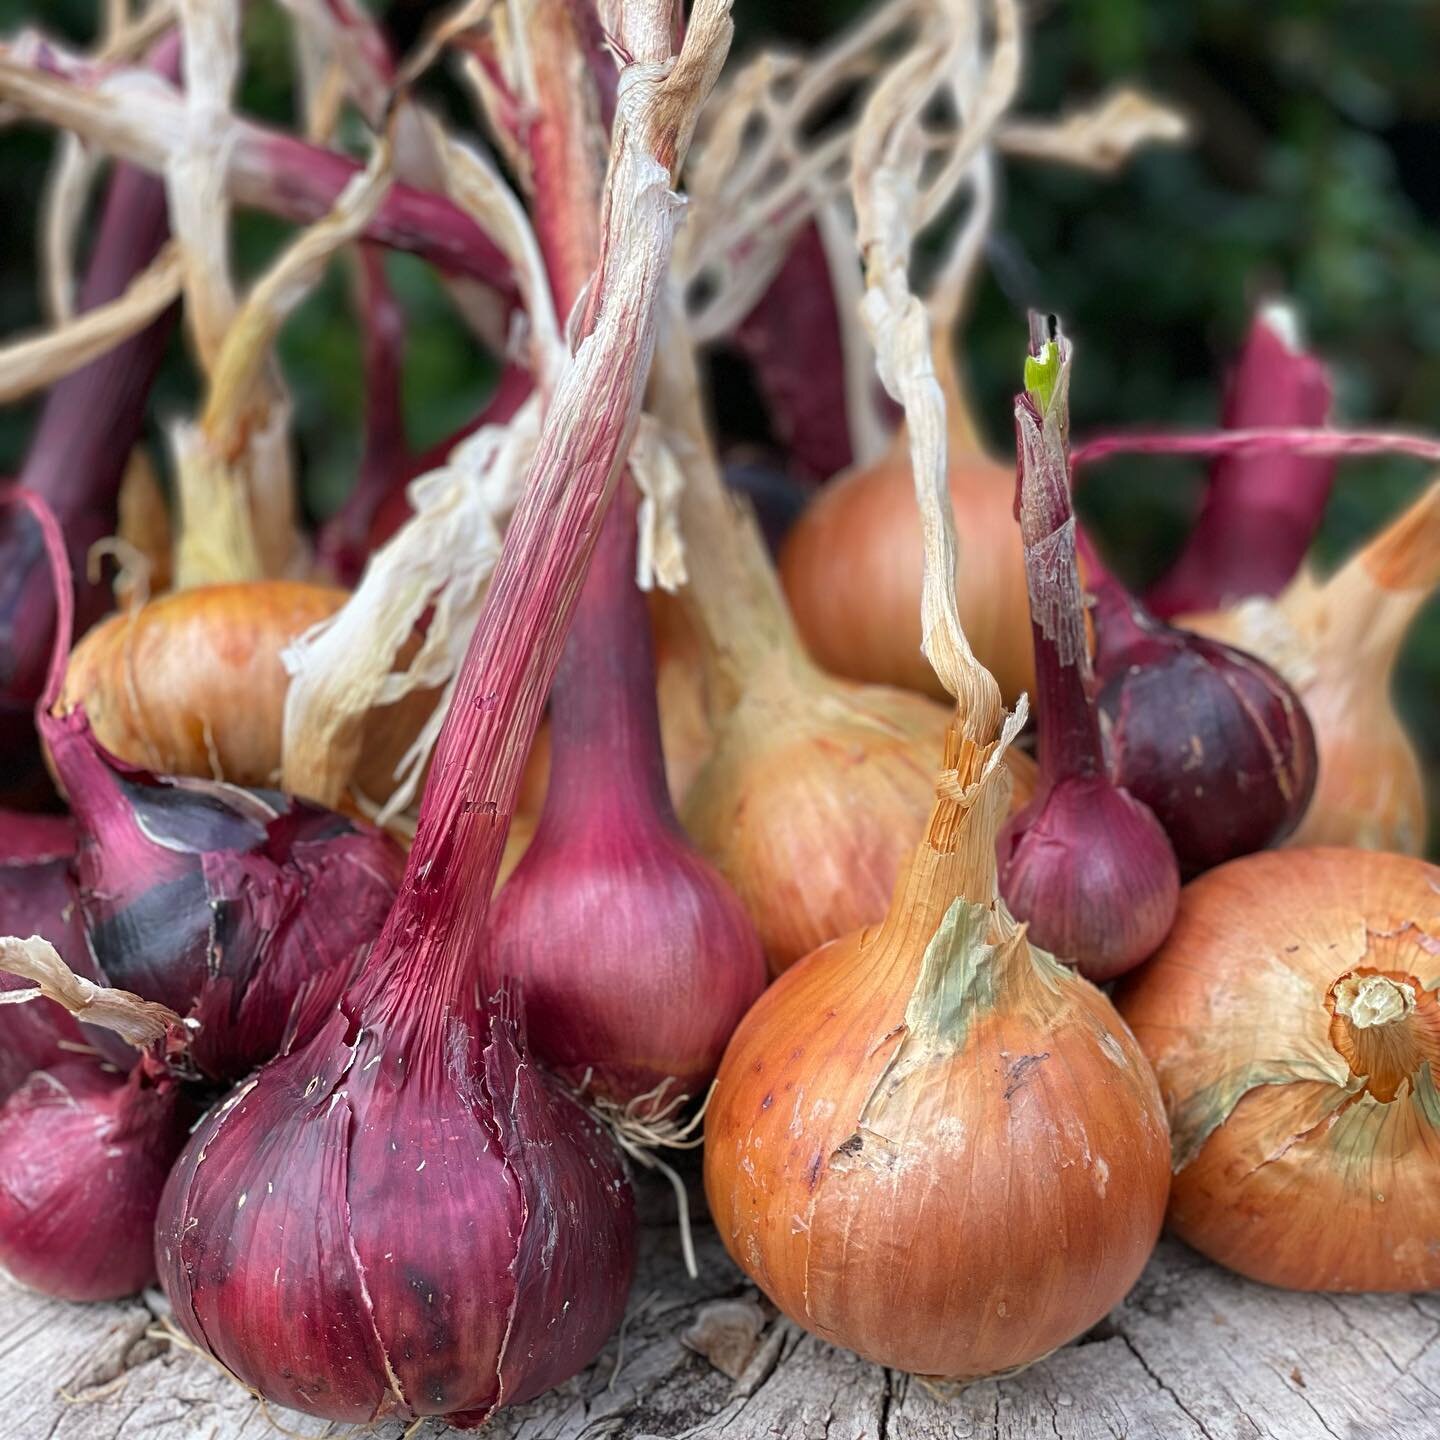 The onions have finished drying out and are ready to store and I&rsquo;m in love with this colour combo, it&rsquo;s feelings very autumnal! 

I love growing onions, they are super easy and let&rsquo;s be honest they are a kitchen staple and the base 